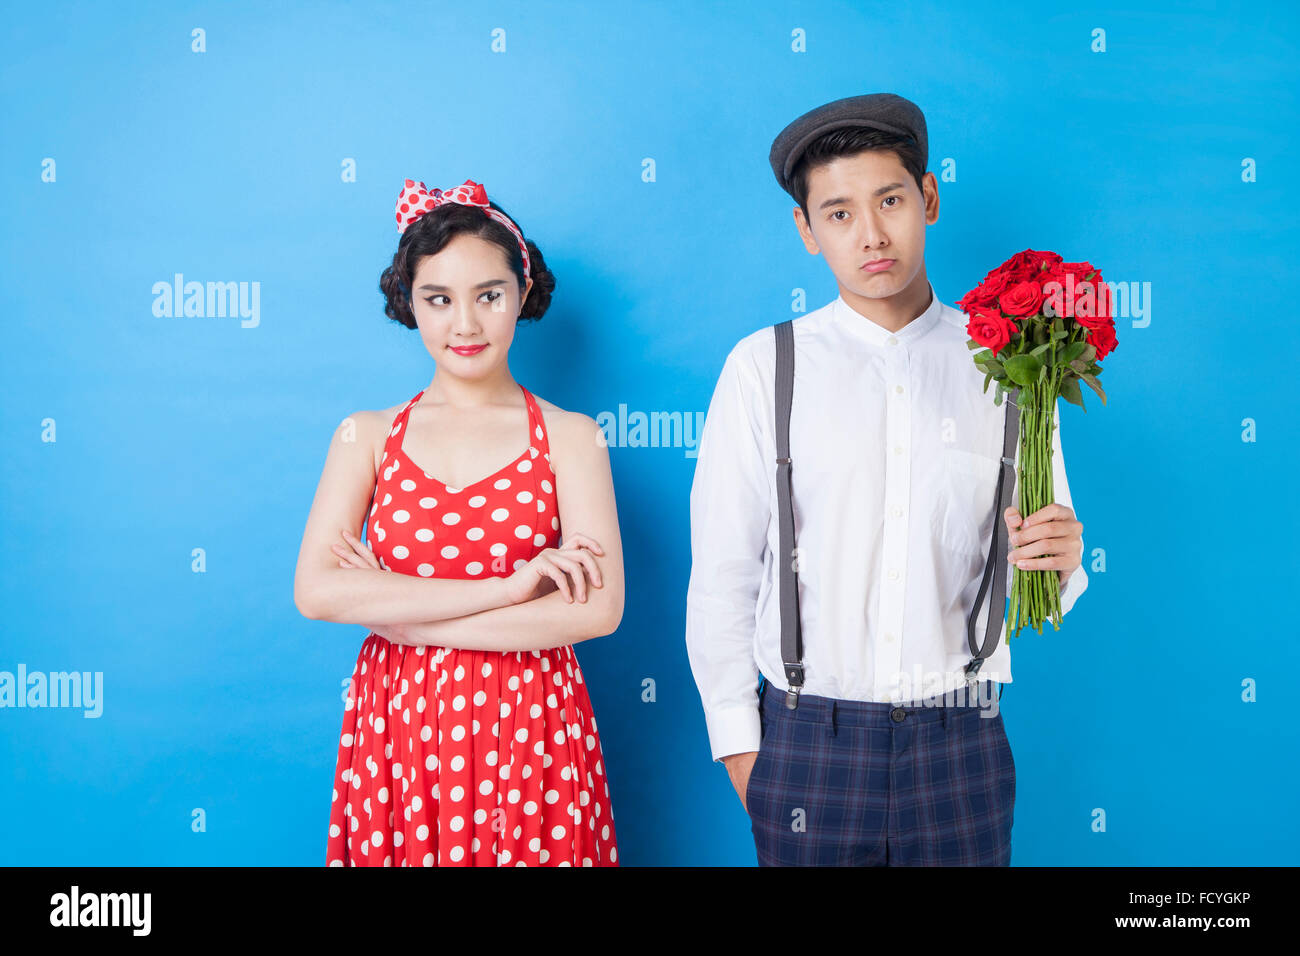 Man holding flowers and woman looking aside with her arms folded in angry face both in retro style fashion Stock Photo